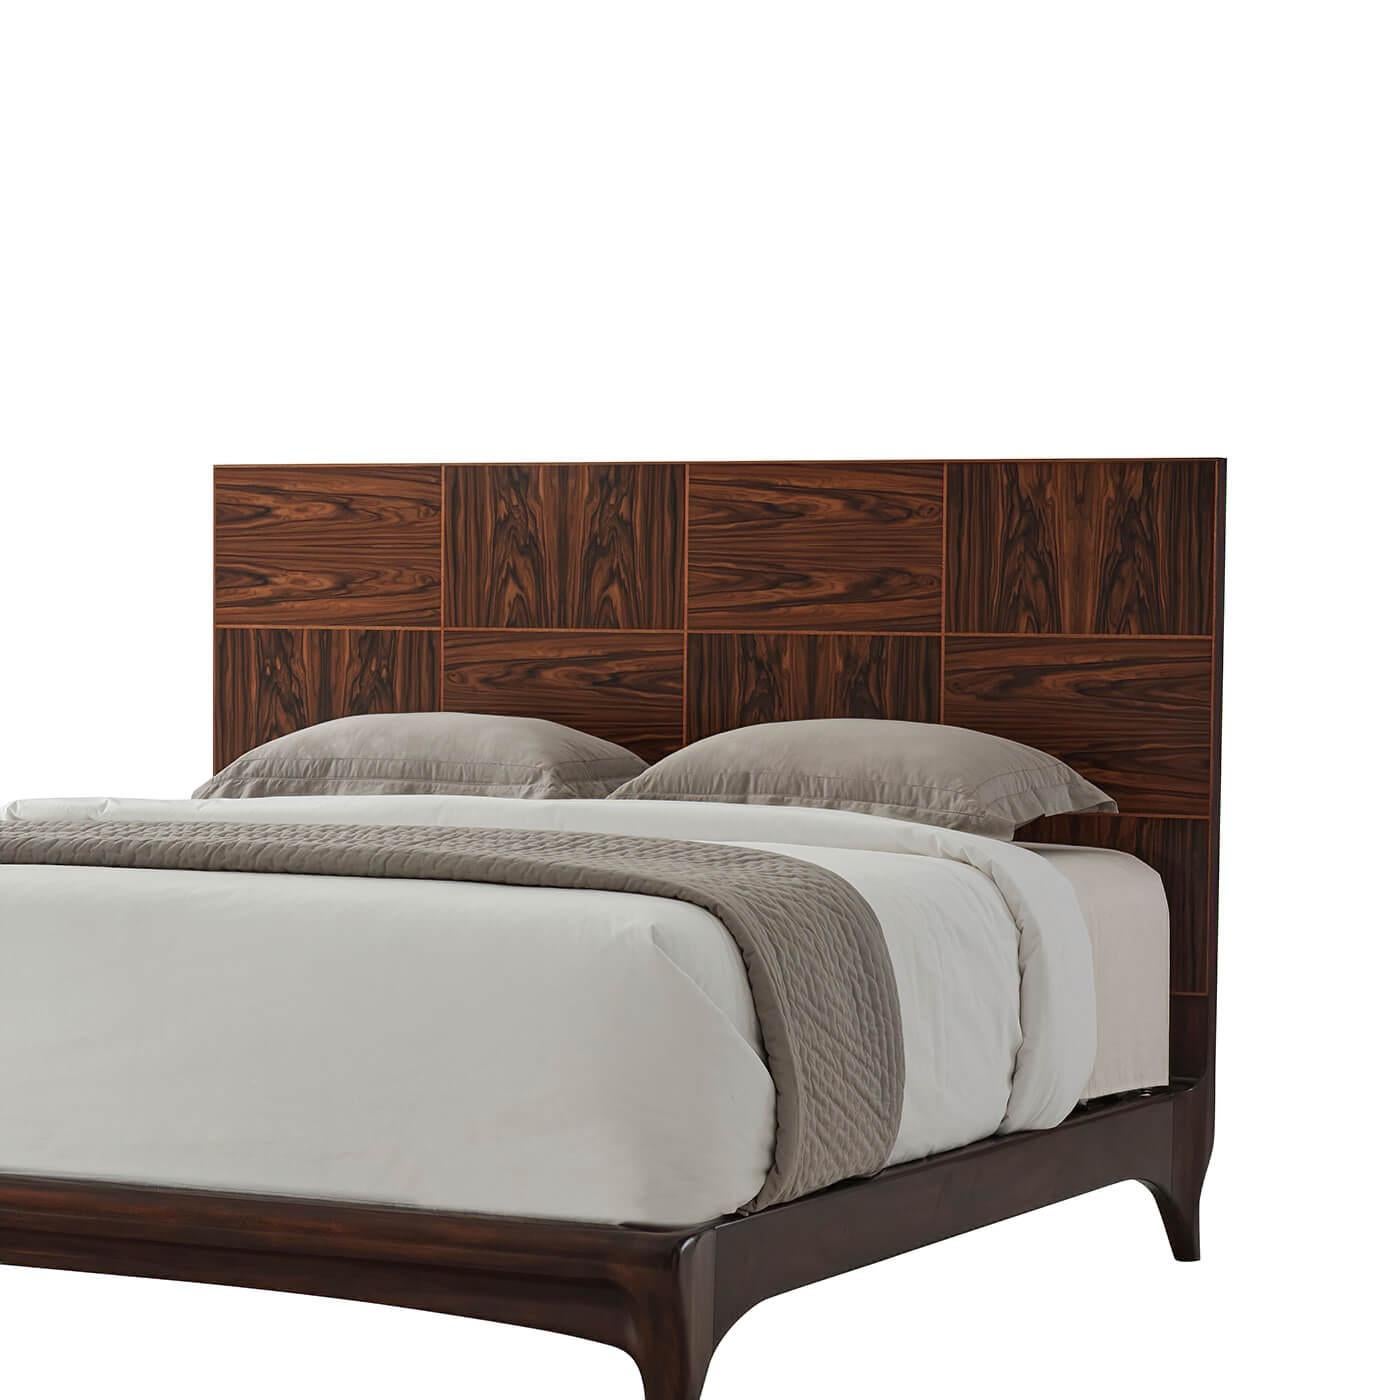 Vietnamese Mid-Century Modern Bed For Sale